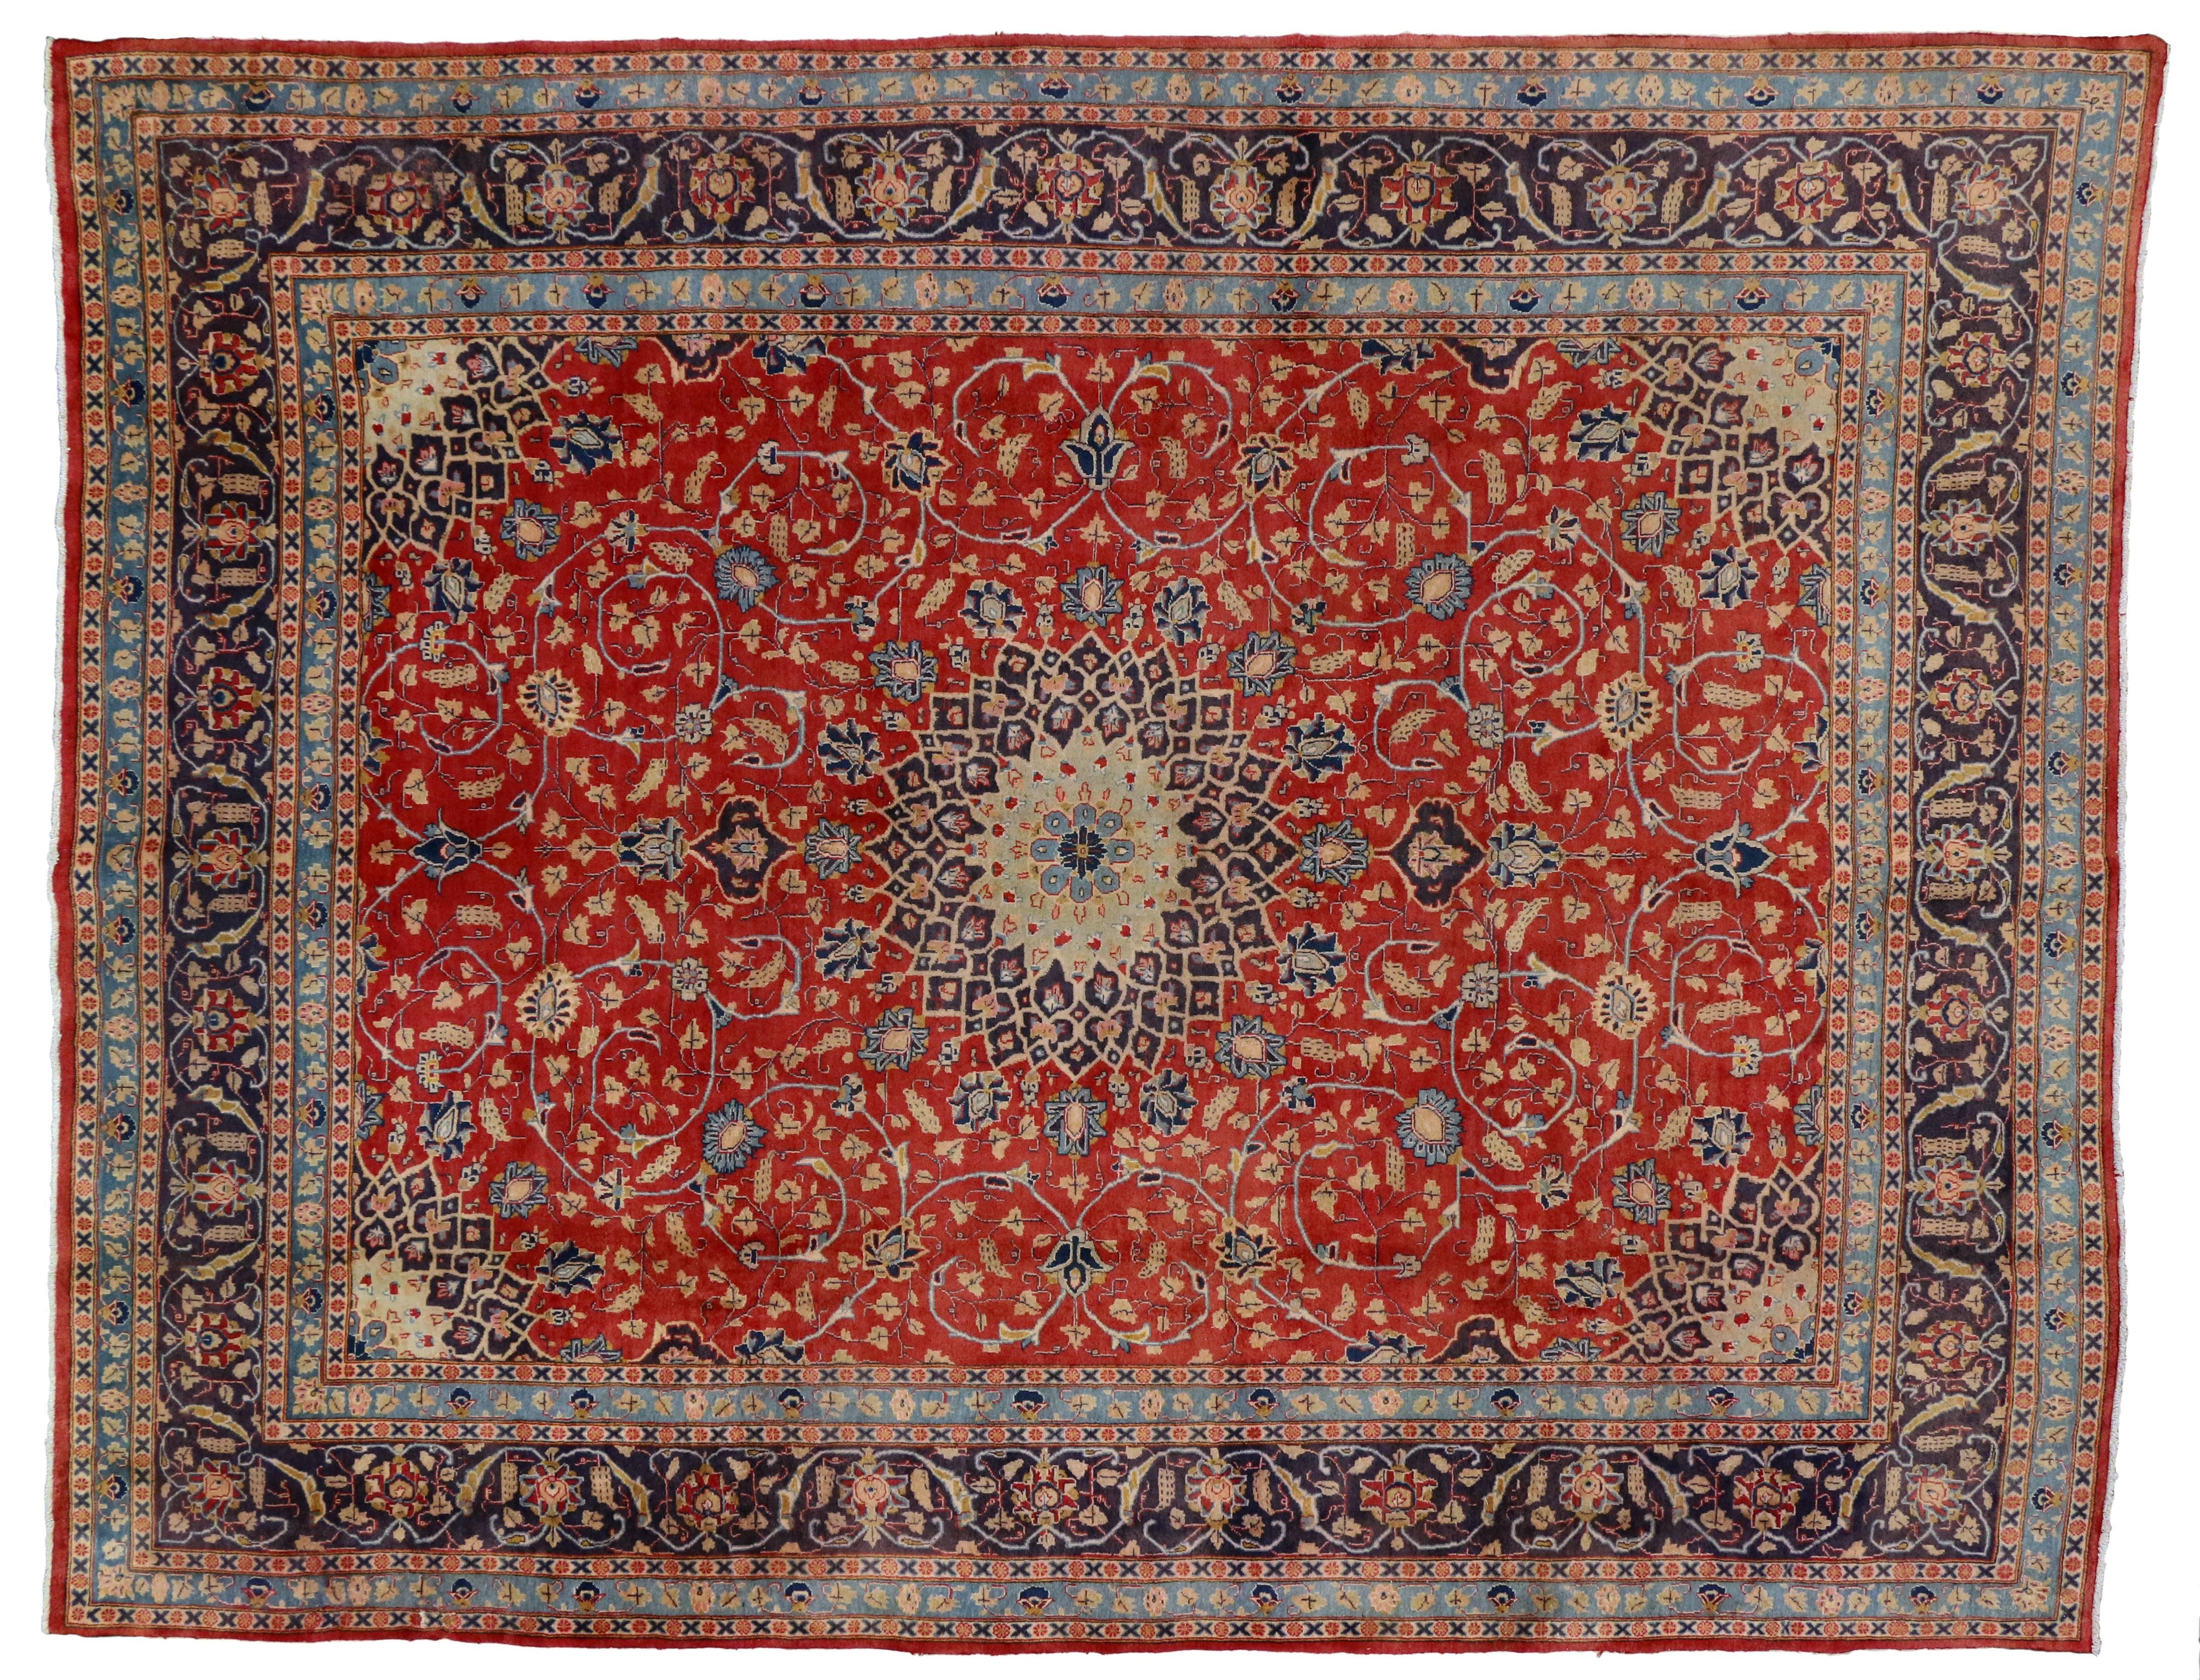 20th Century Vintage Persian Khorassan Rug with Traditional Style